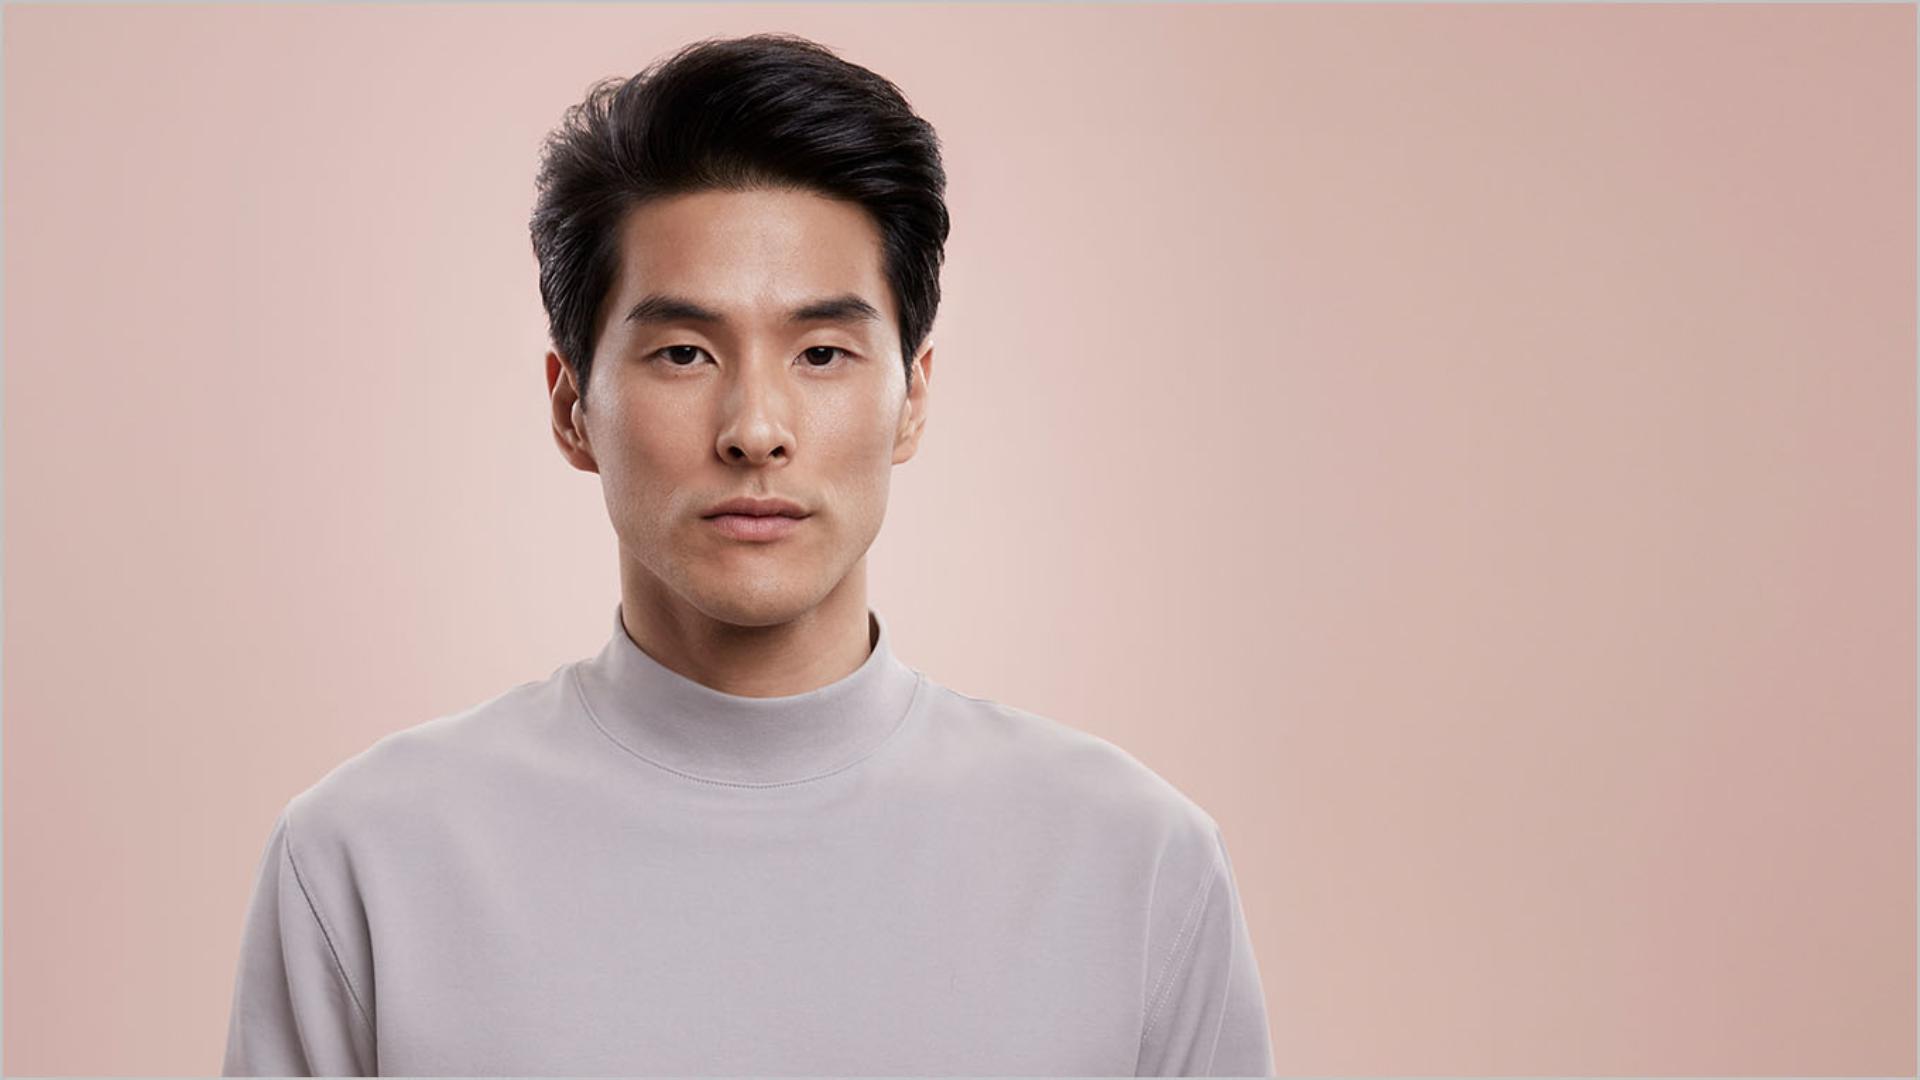 Male model with a textured style from the Dyson Supersonic